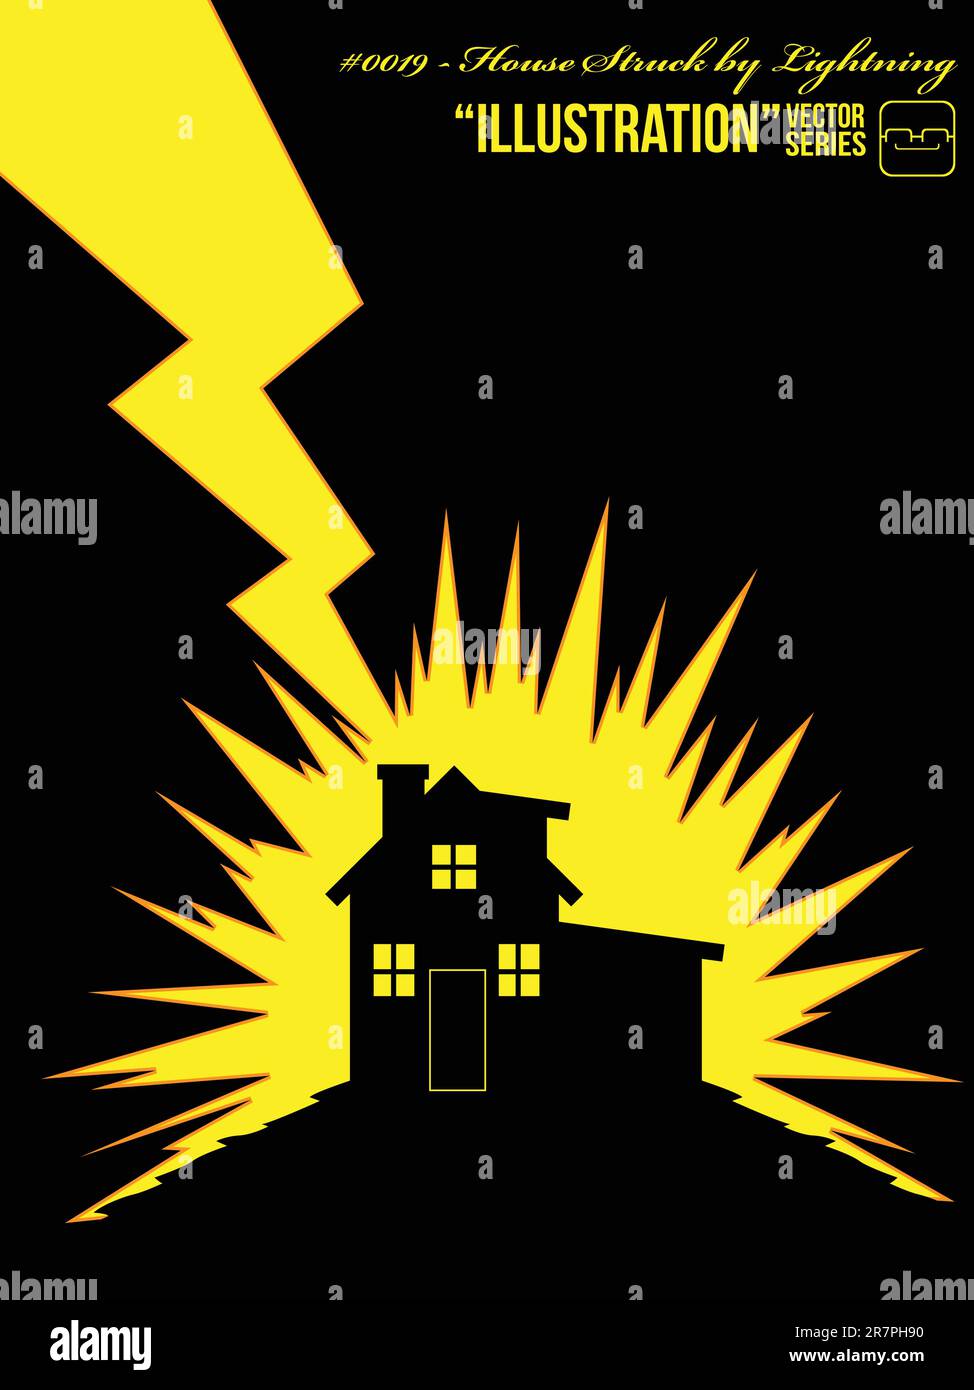 A vector of silhouette of lightning striking a house.   Available as a Vector in EPS8 format that can be scaled to any size without loss of quality... Stock Vector